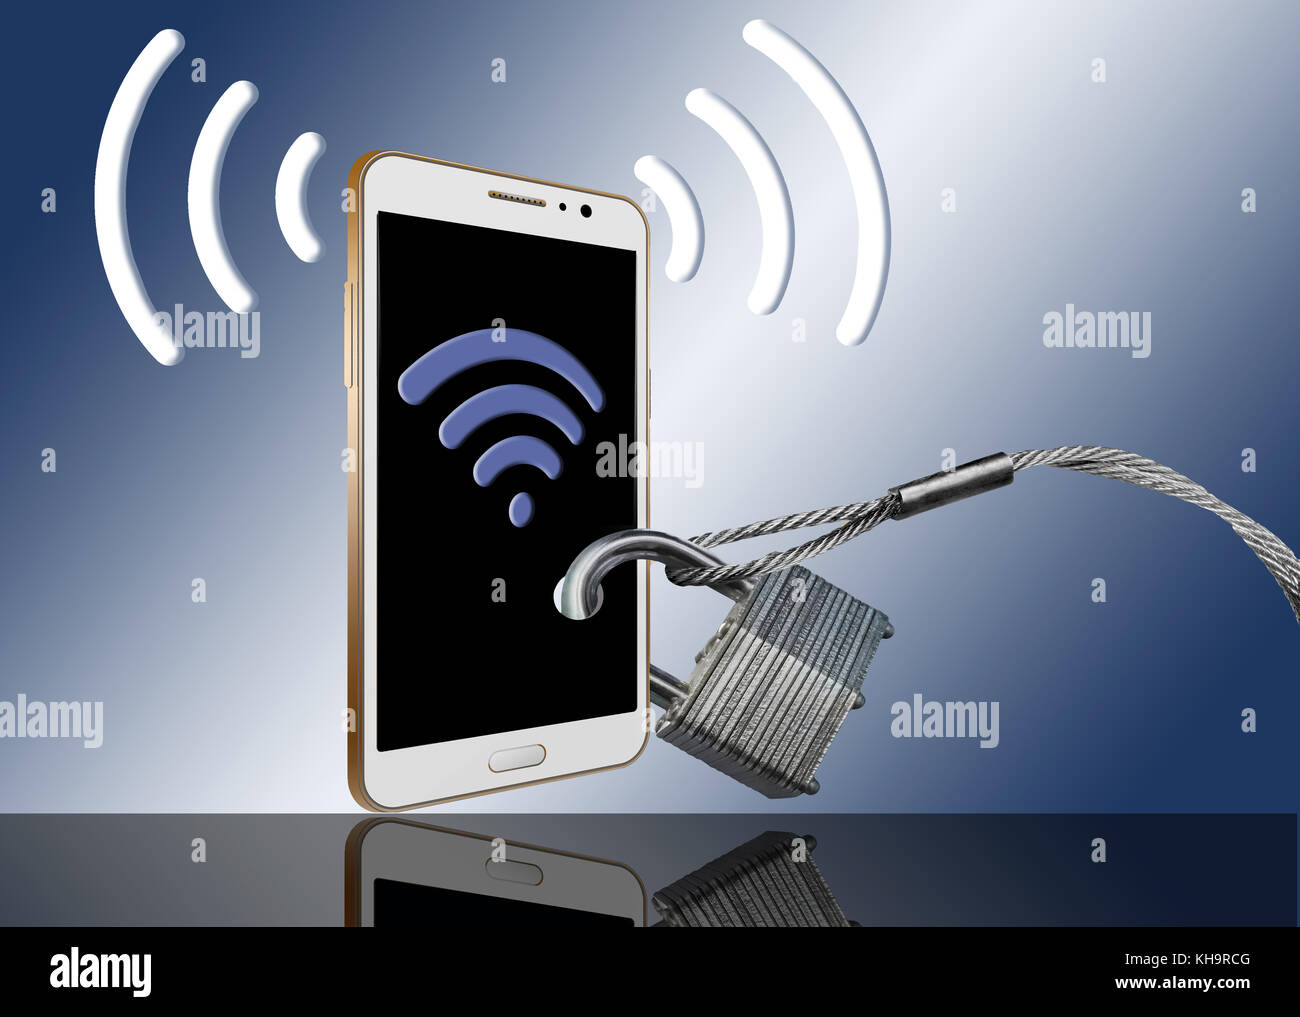 Cell phone security and preventing signal theft is the theme of this illustration. Wi-fi signals, Bluetooth and cellular signals fill the air and are Stock Photo